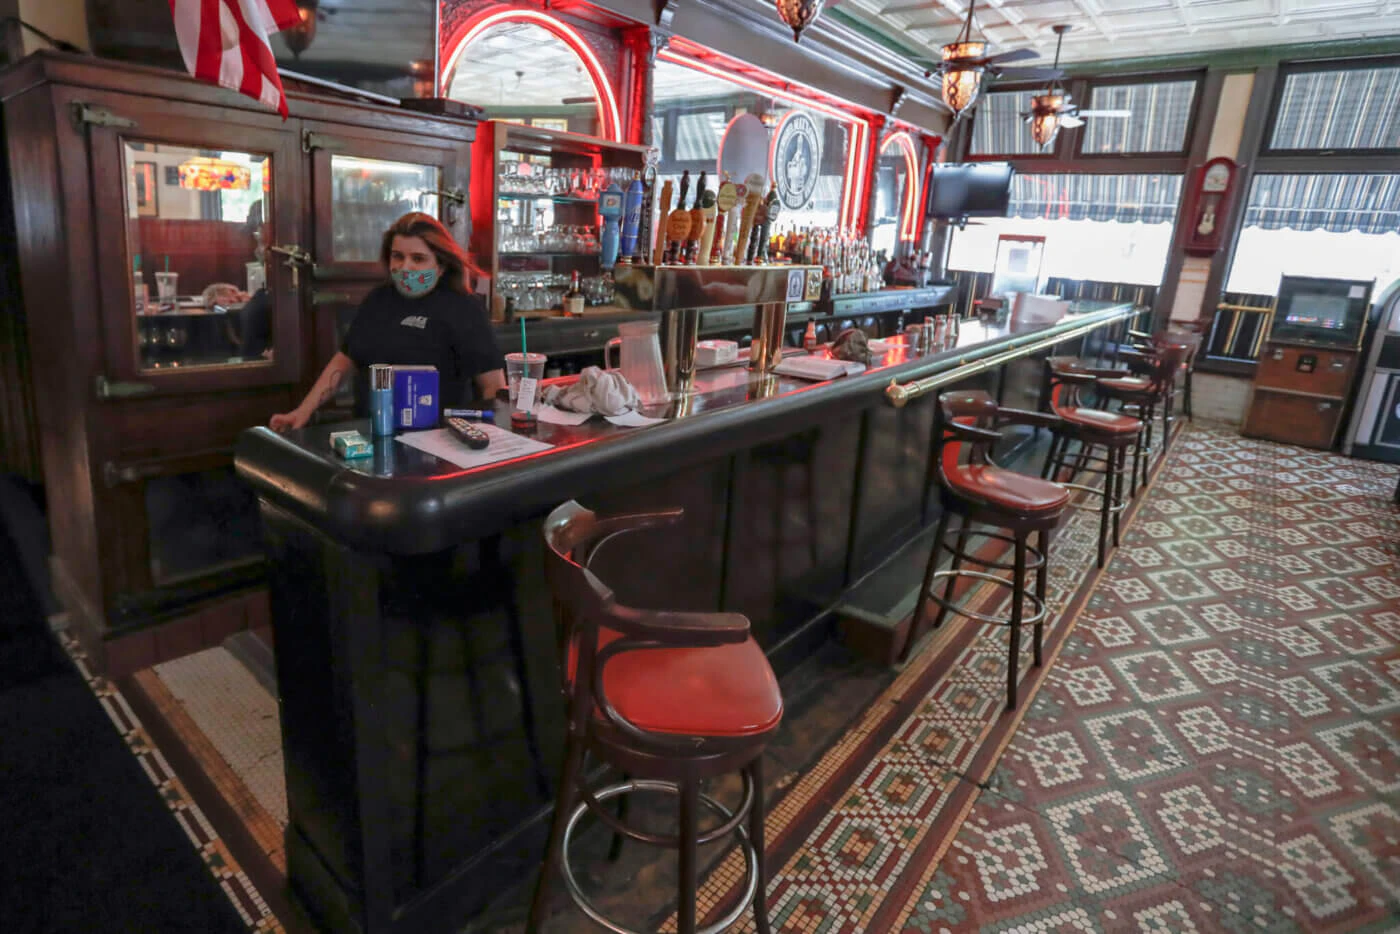 Bartender Sara Kennely, walks behind the bar as preparations, like spacing out the barstools, are underway, Thursday, June 4, 2020, at Max's Allegheny Tavern on Pittsburgh's North Side for patrons to dine inside is permitted when most of southwest Pennsylvania loosens COVID-19 restrictions allowing eat-in dining on Friday. (AP Photo/Keith Srakocic)